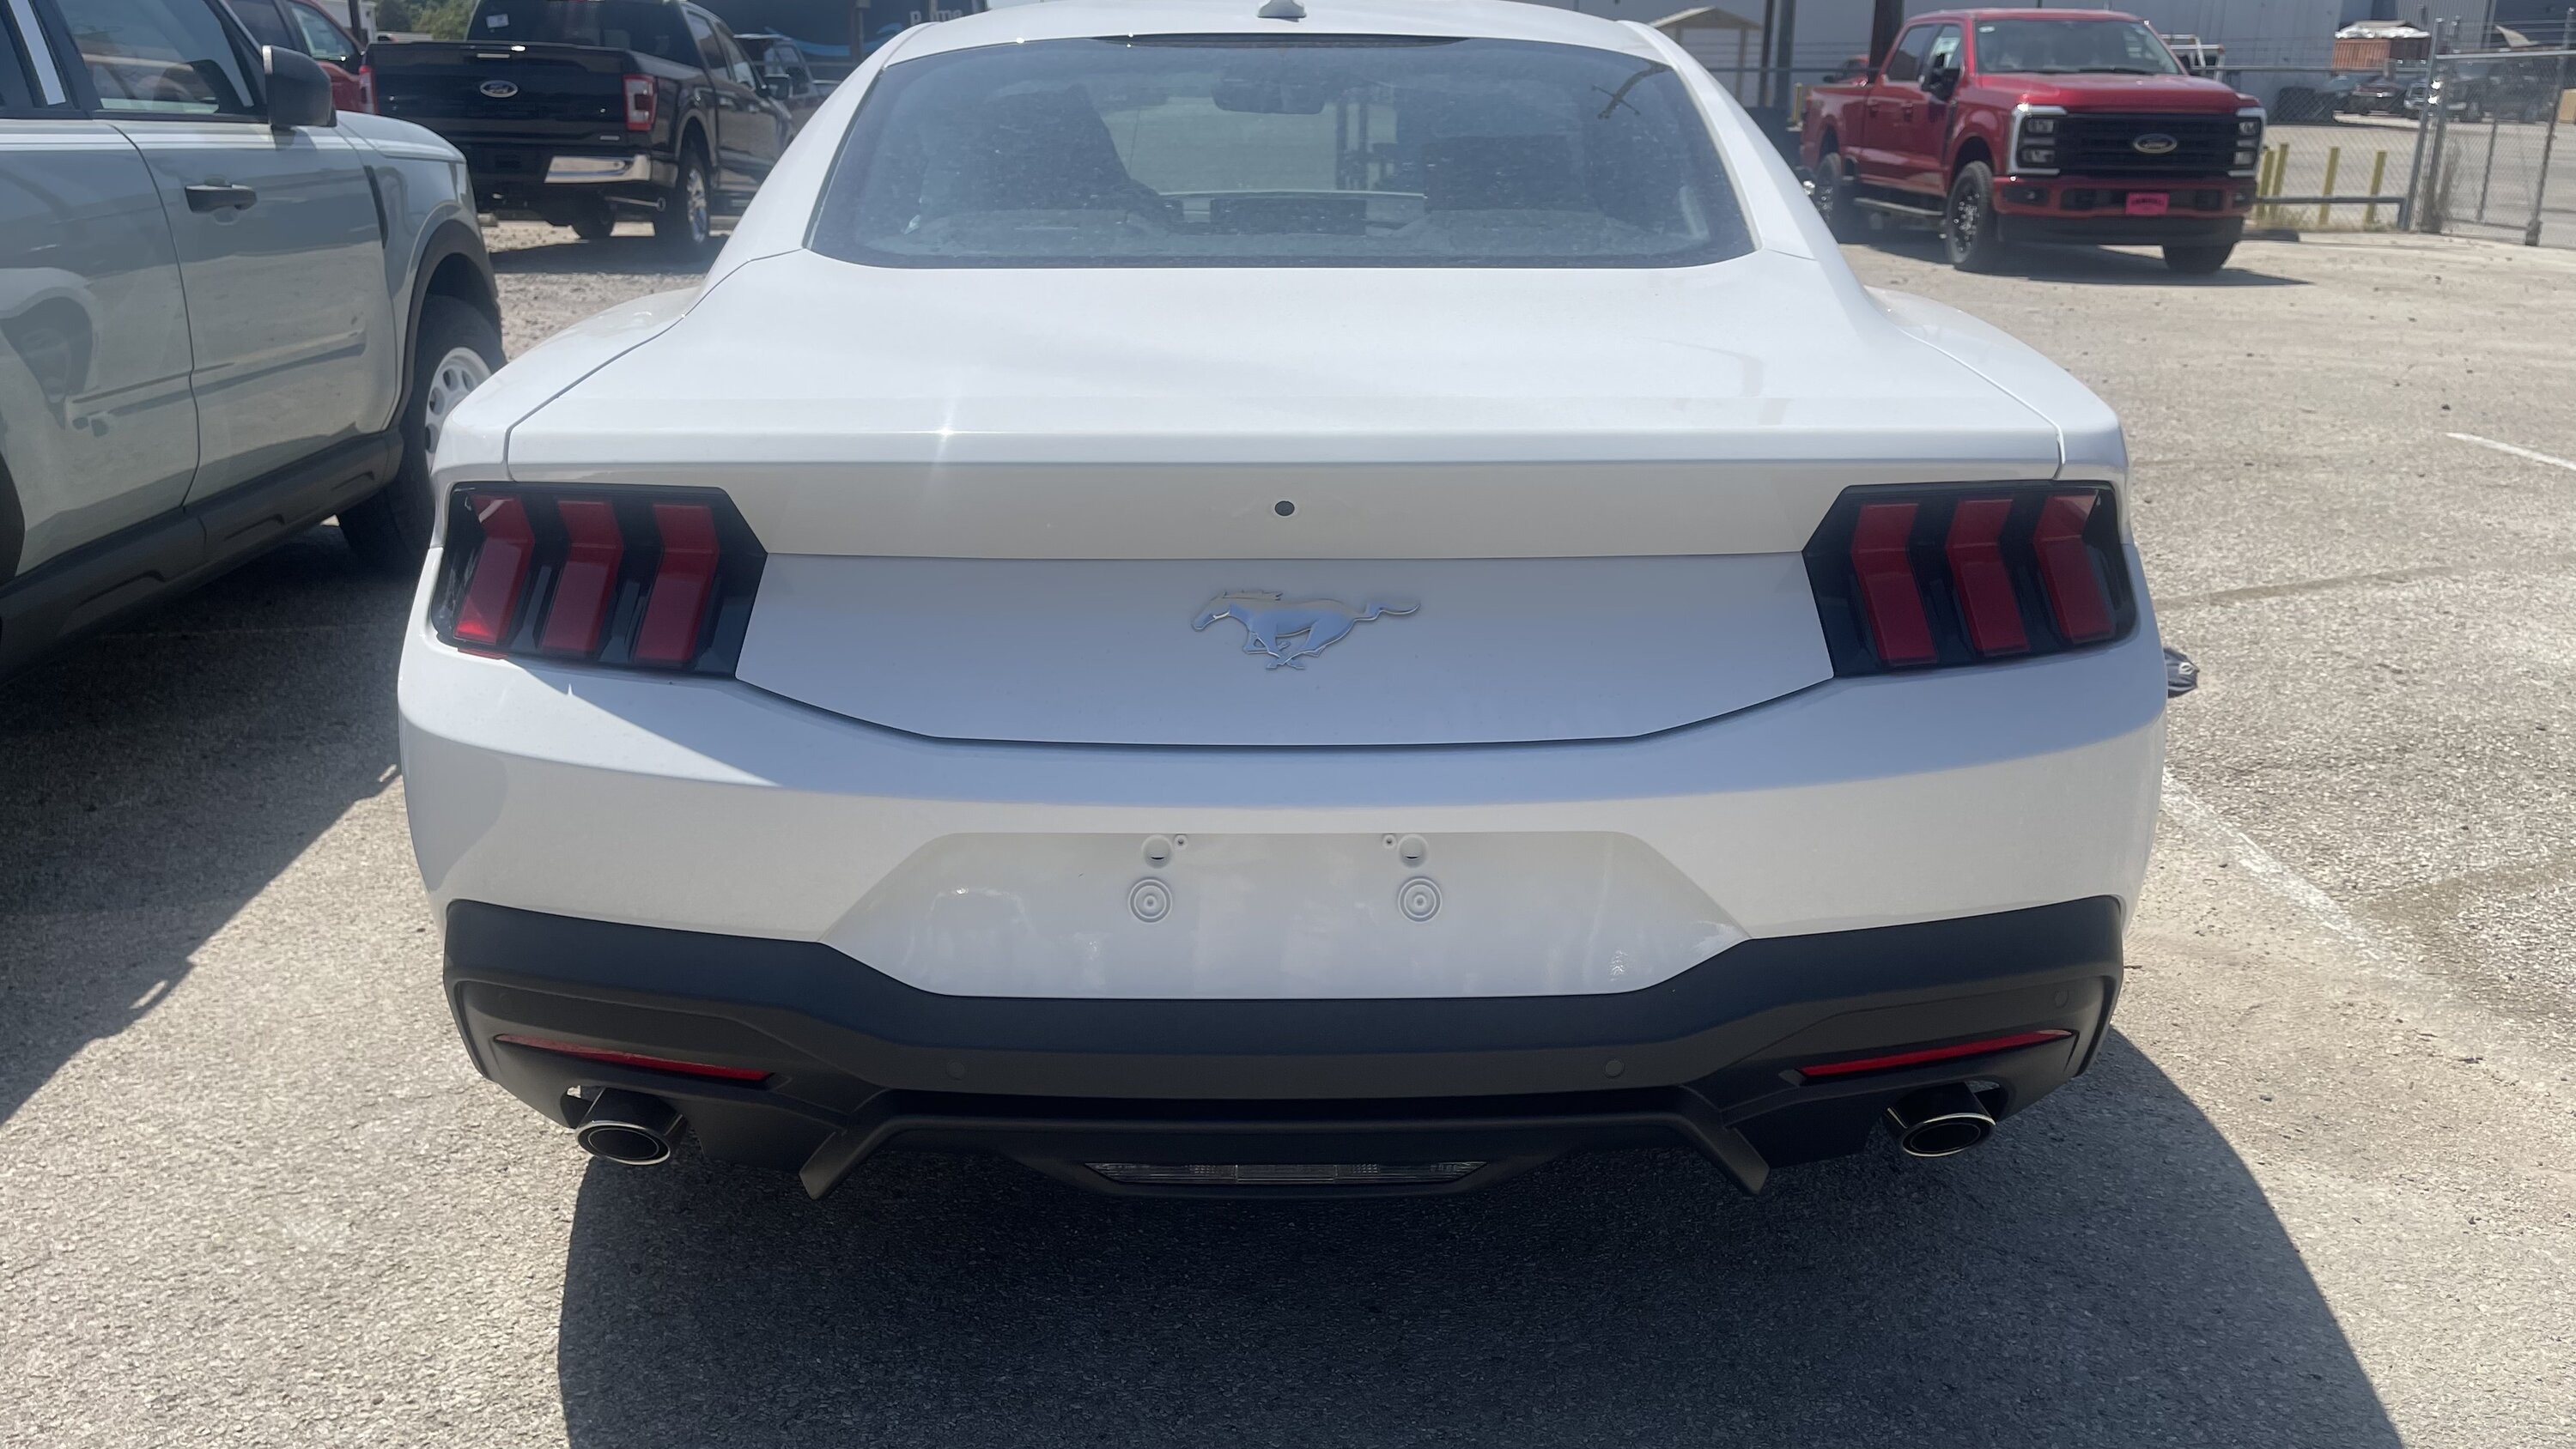 S650 Mustang Official OXFORD WHITE Mustang S650 Thread 9C7004C6-FC4F-4434-A1F3-BD05B9625E4C